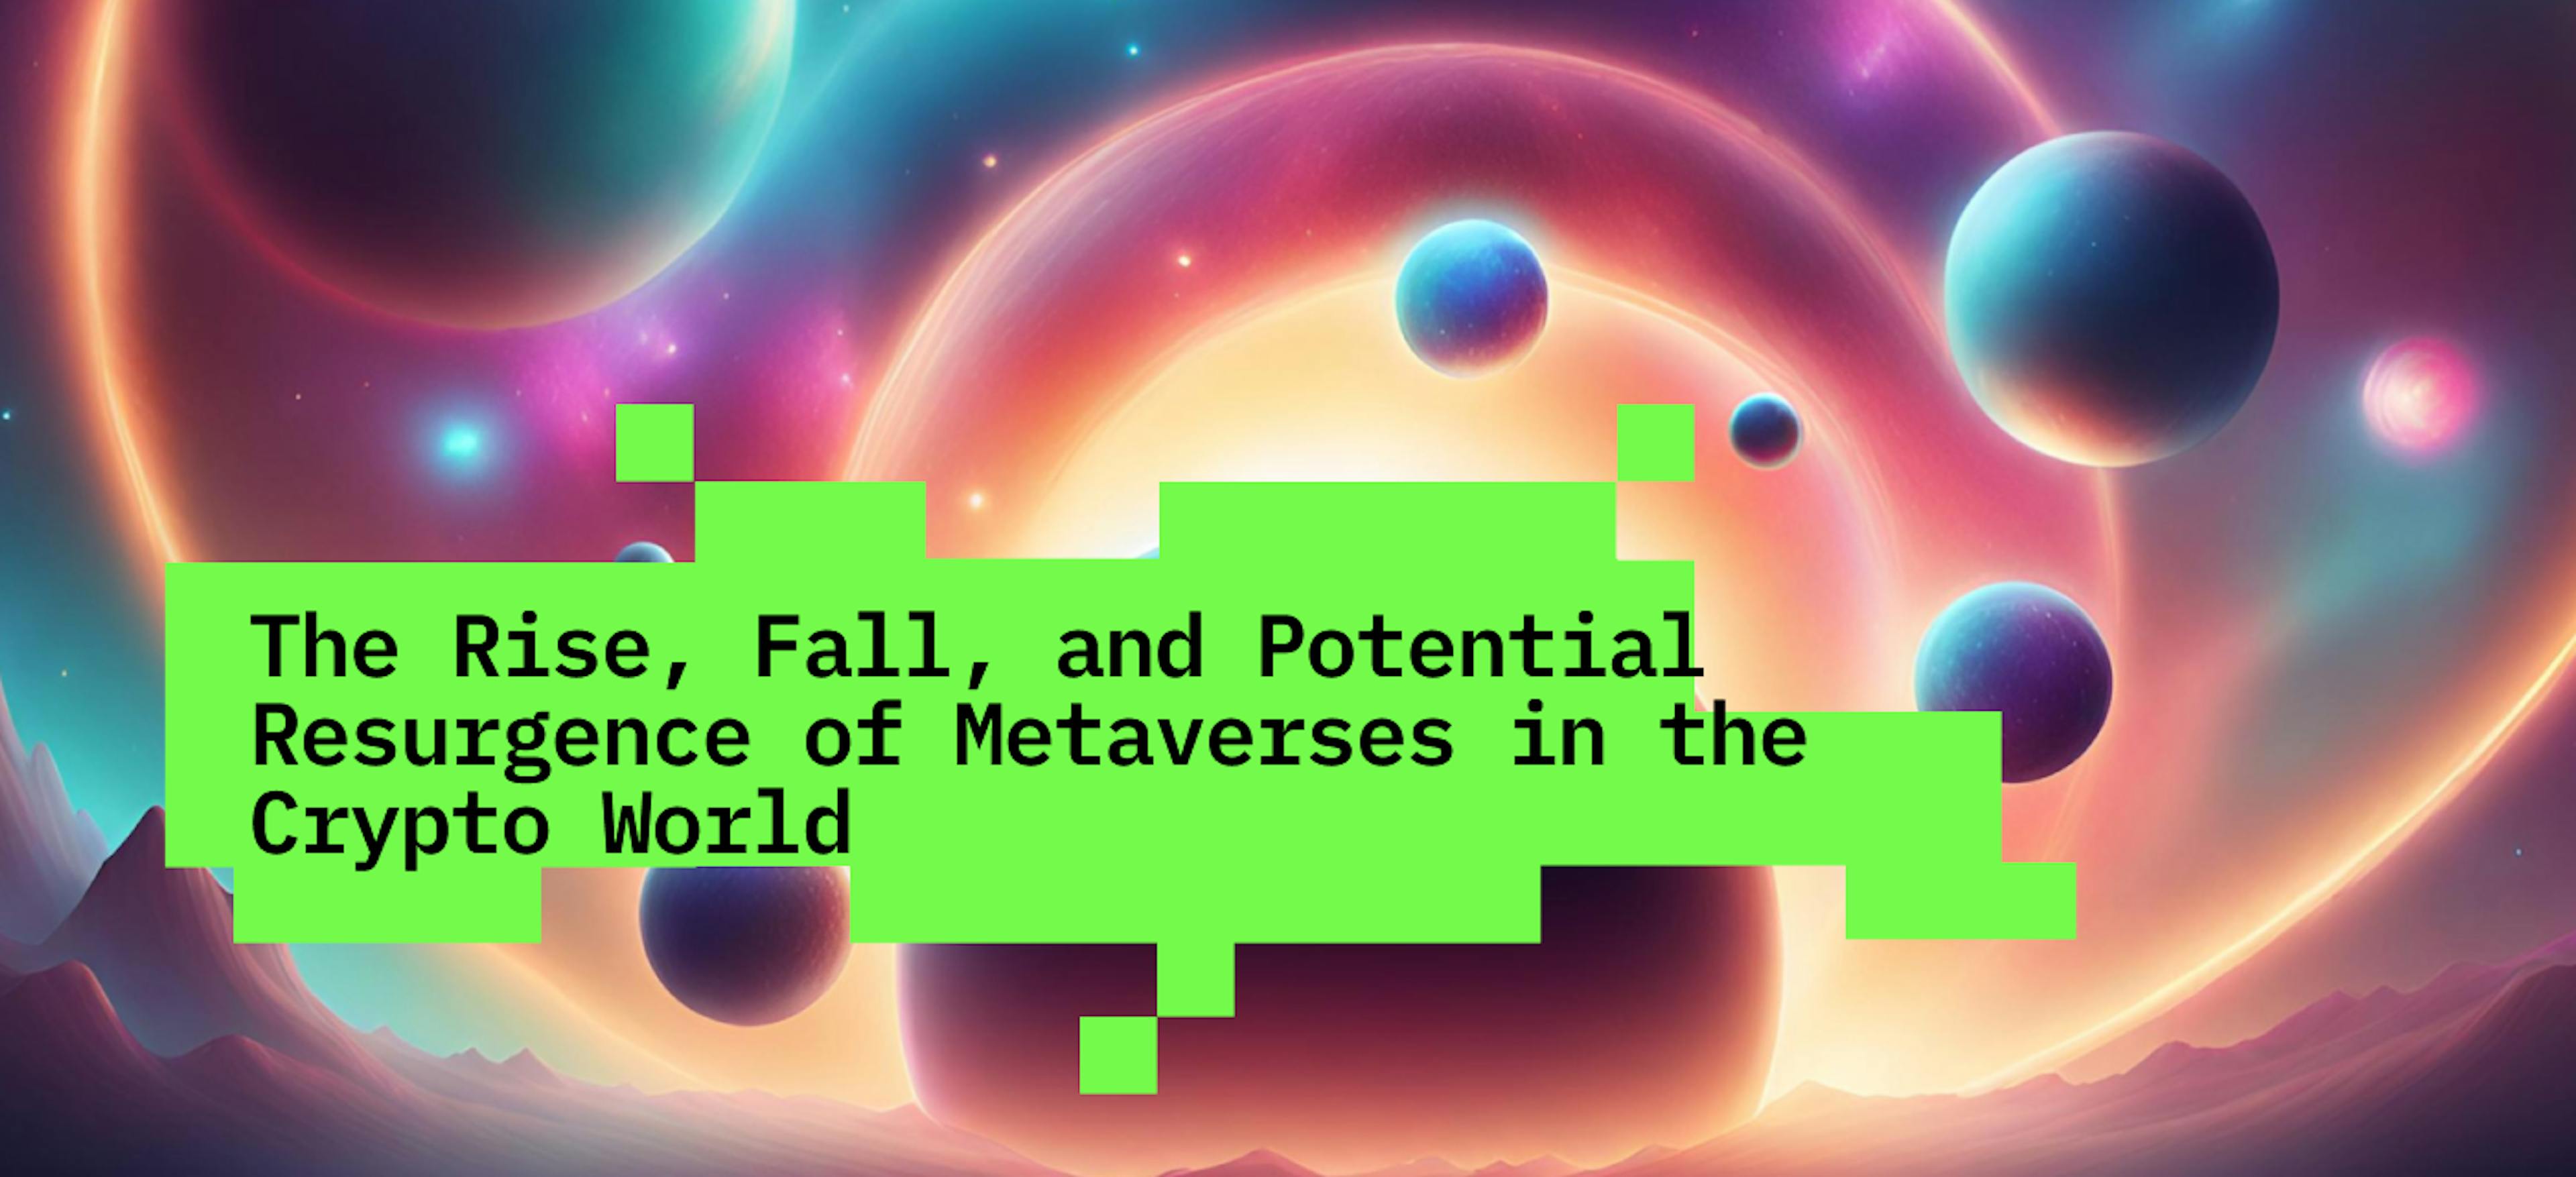 featured image - The Rise, Fall, and Potential Resurgence of Metaverses in the Crypto World